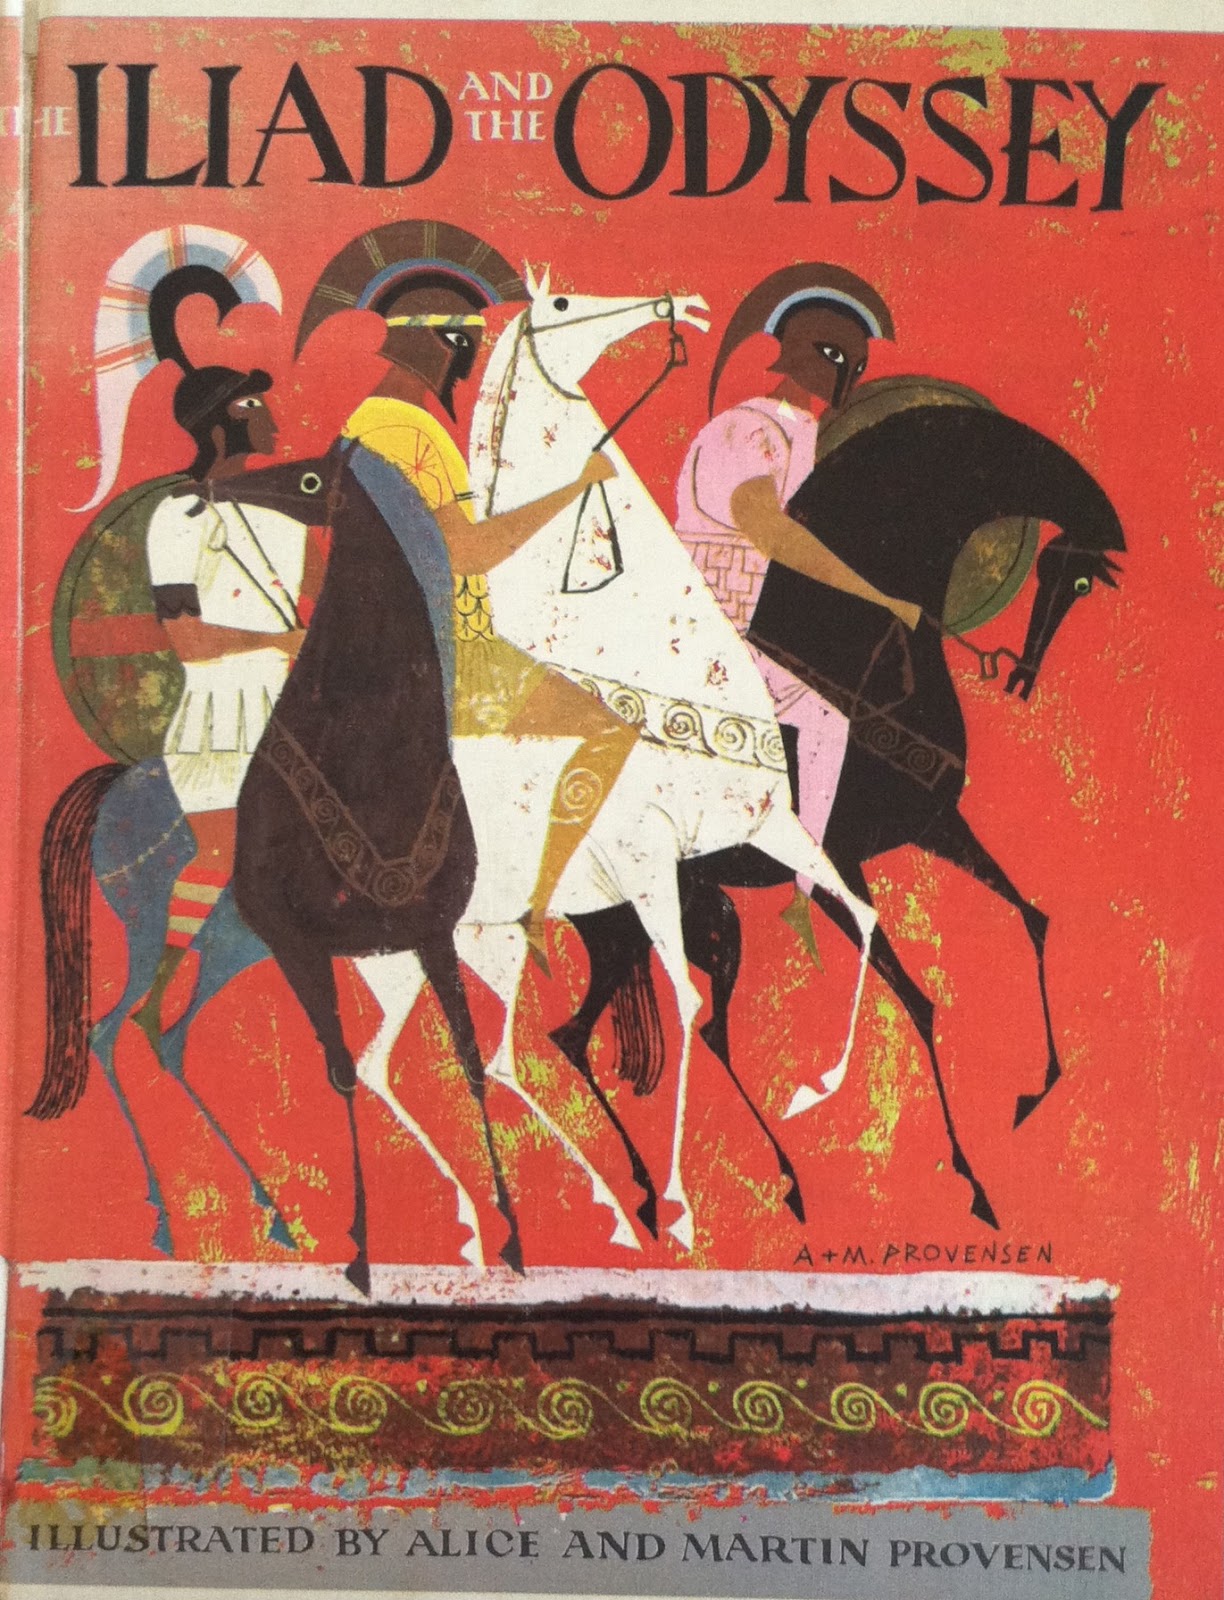 iliad and the odyssey book